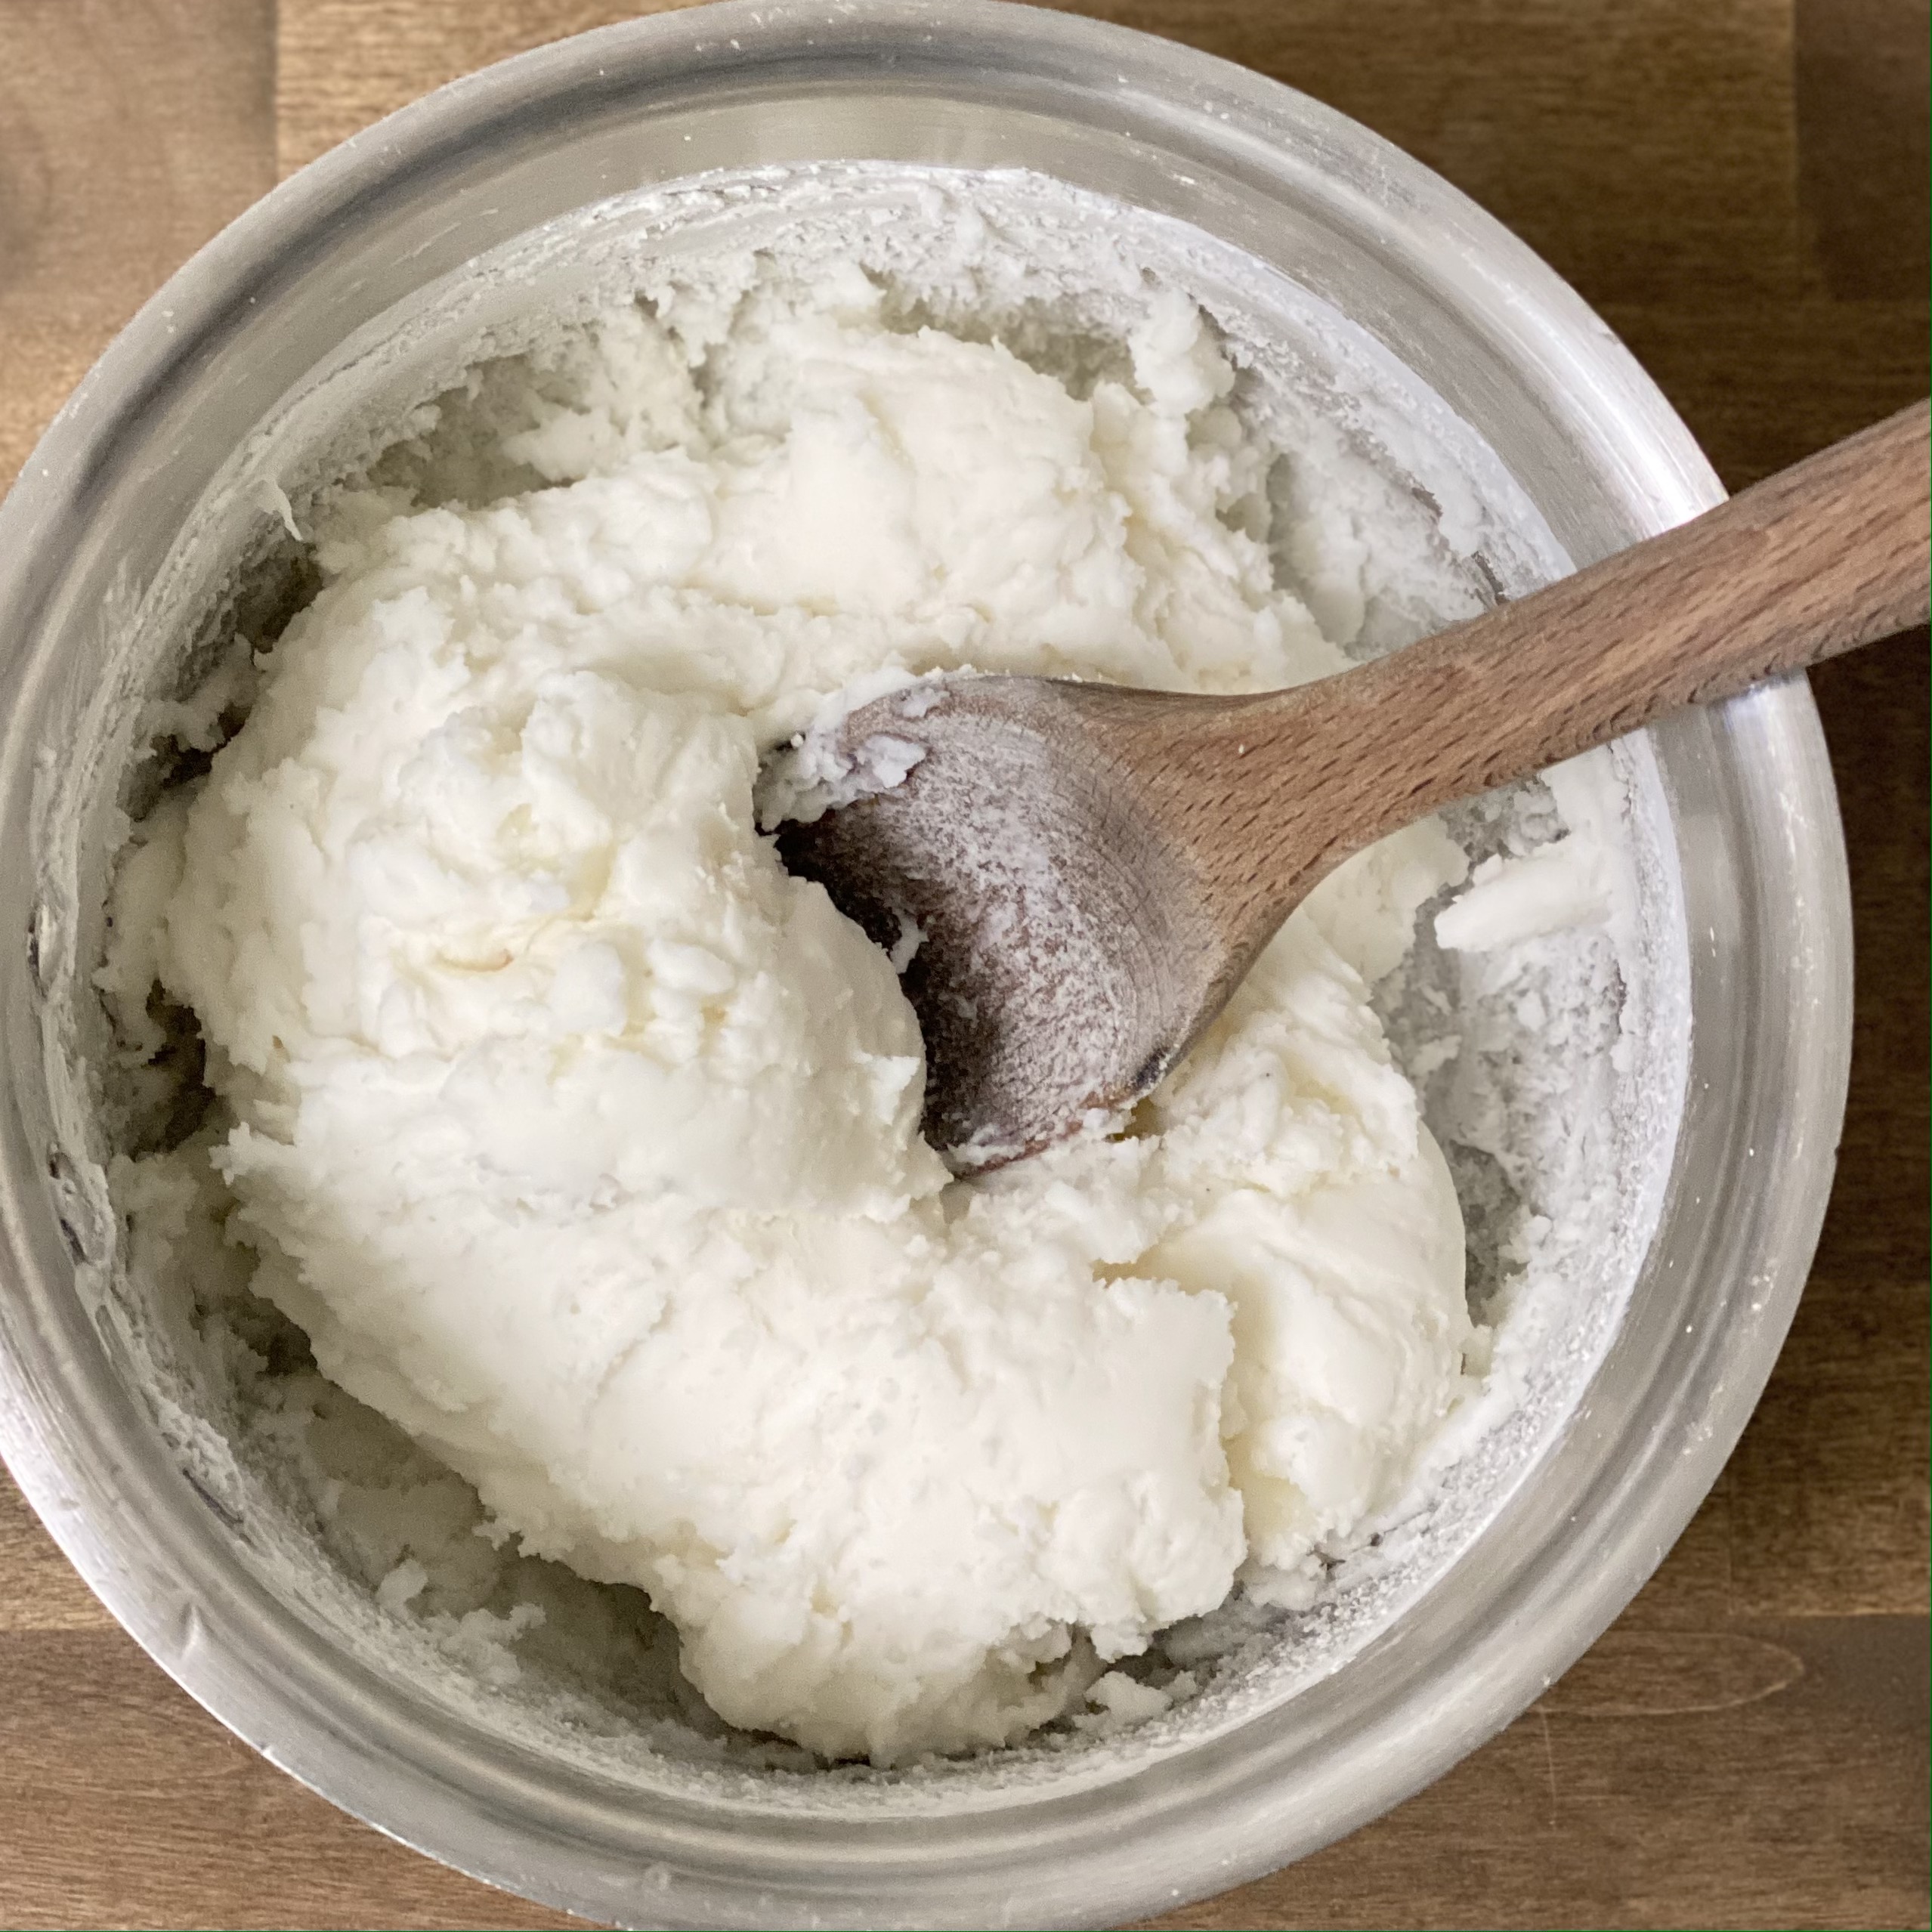 Baking soda dough in a saucepan with a wooden spoon in it.